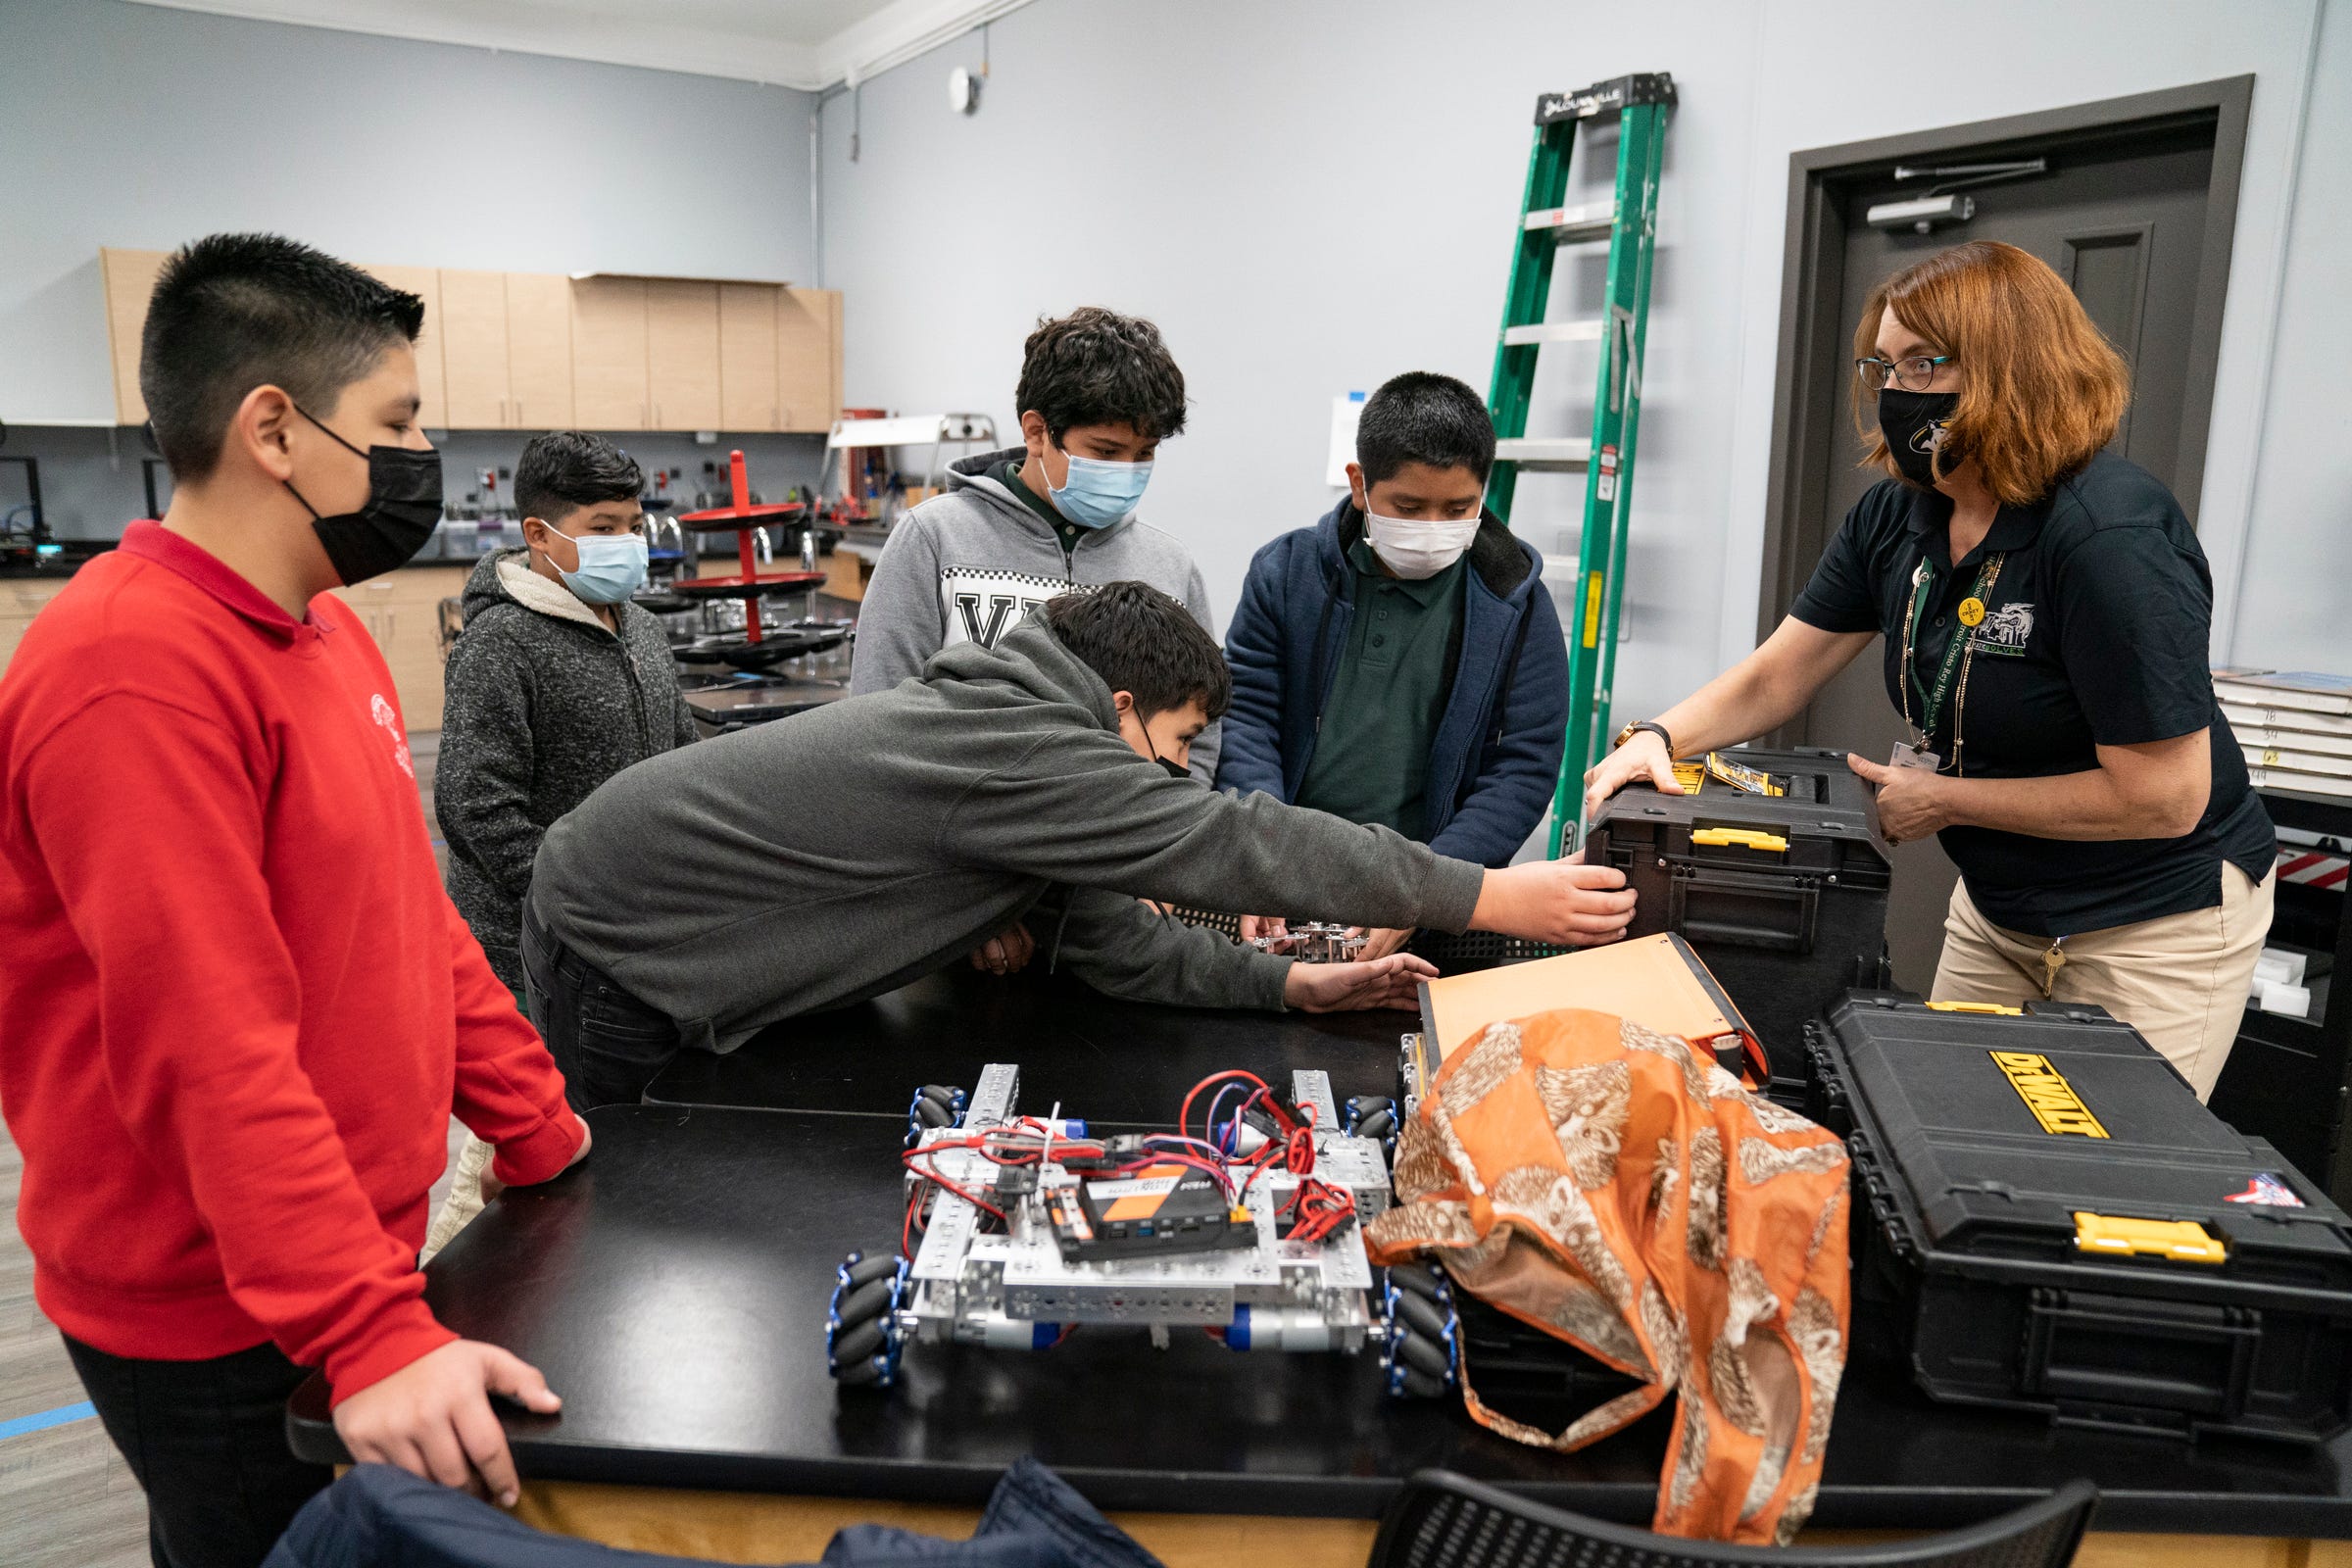 Students from Neinas Dual Language Learning Academy from left, Anthony Sanchez, 13, Francisco Brabo, 12, Anthony Florentin, 12, Owen Reyes, 12, and Daniel Roblero, 12, join robotics coach Ann McGowan at Cristo Rey High School as they participate in learning robotics on Nov. 18, 2021 at Cristo Rey High School in Detroit.